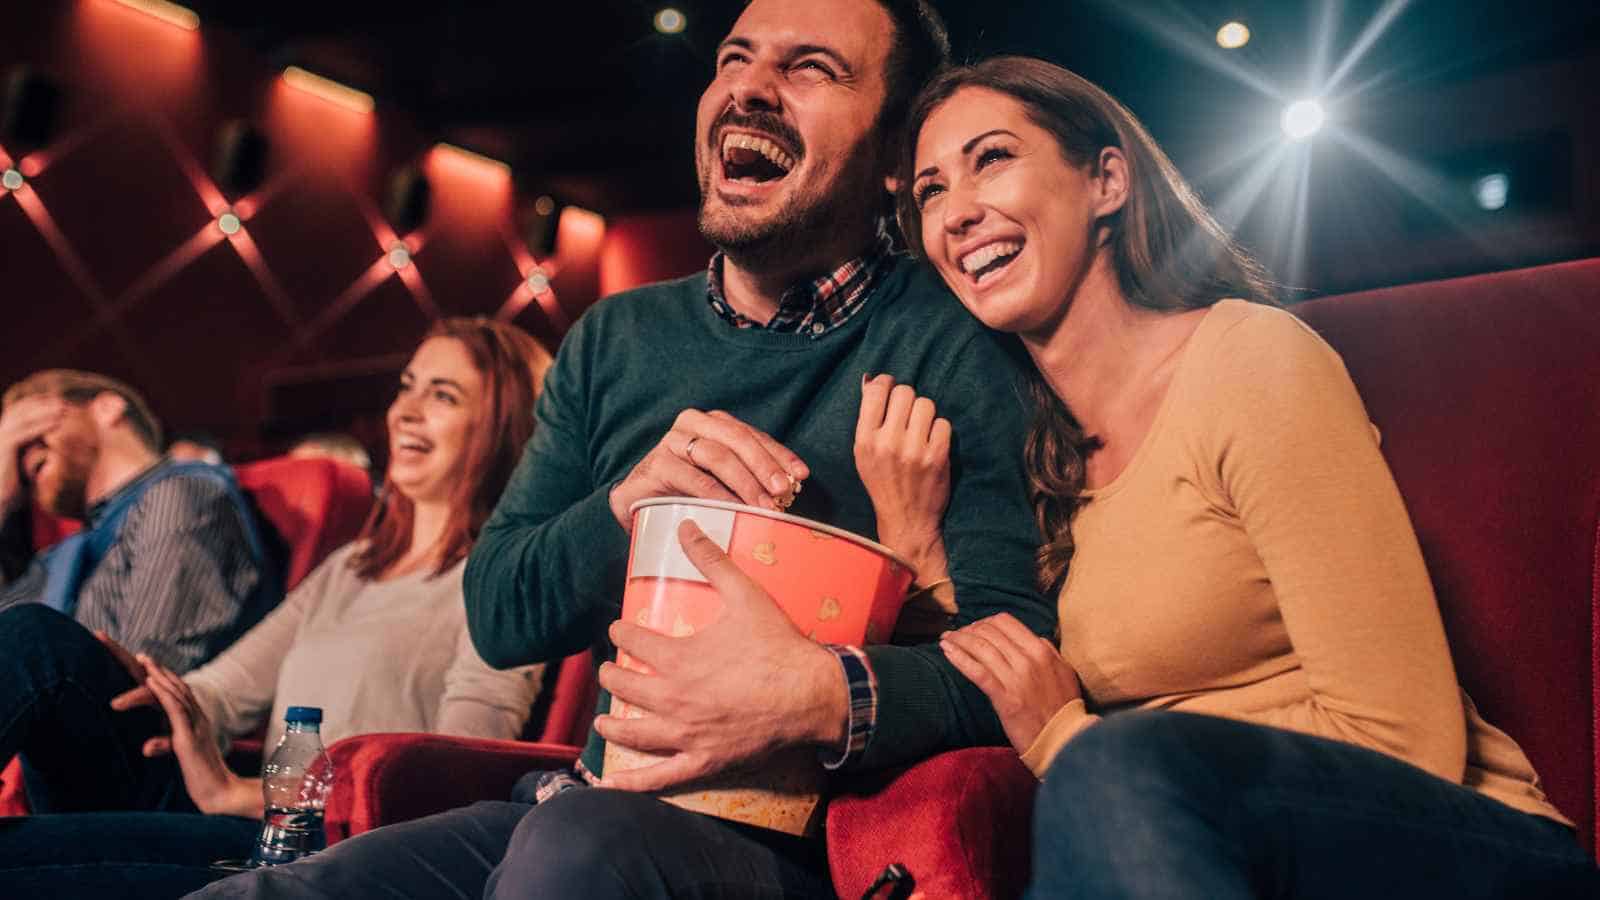 <p>Going to the movies has always been a popular pastime, but after the pandemic hit, many people lost interest in returning to crowded theaters. With streaming providers like Hulu and Netflix bringing new films directly to our homes, it’s hard to justify spending money on overpriced tickets and snacks.</p><p>Plus, who wants to deal with noisy kids and sticky floors when you can have the comfort of your couch?</p>